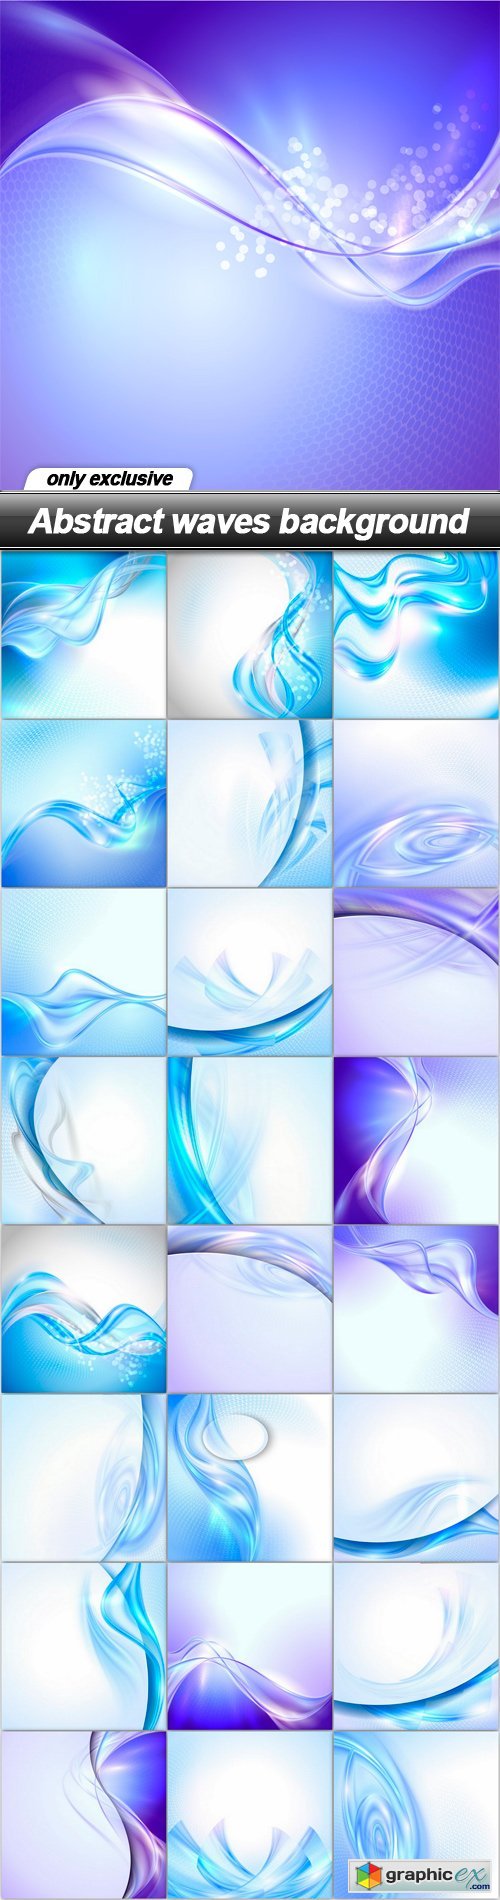 Abstract waves background - 25 EPS